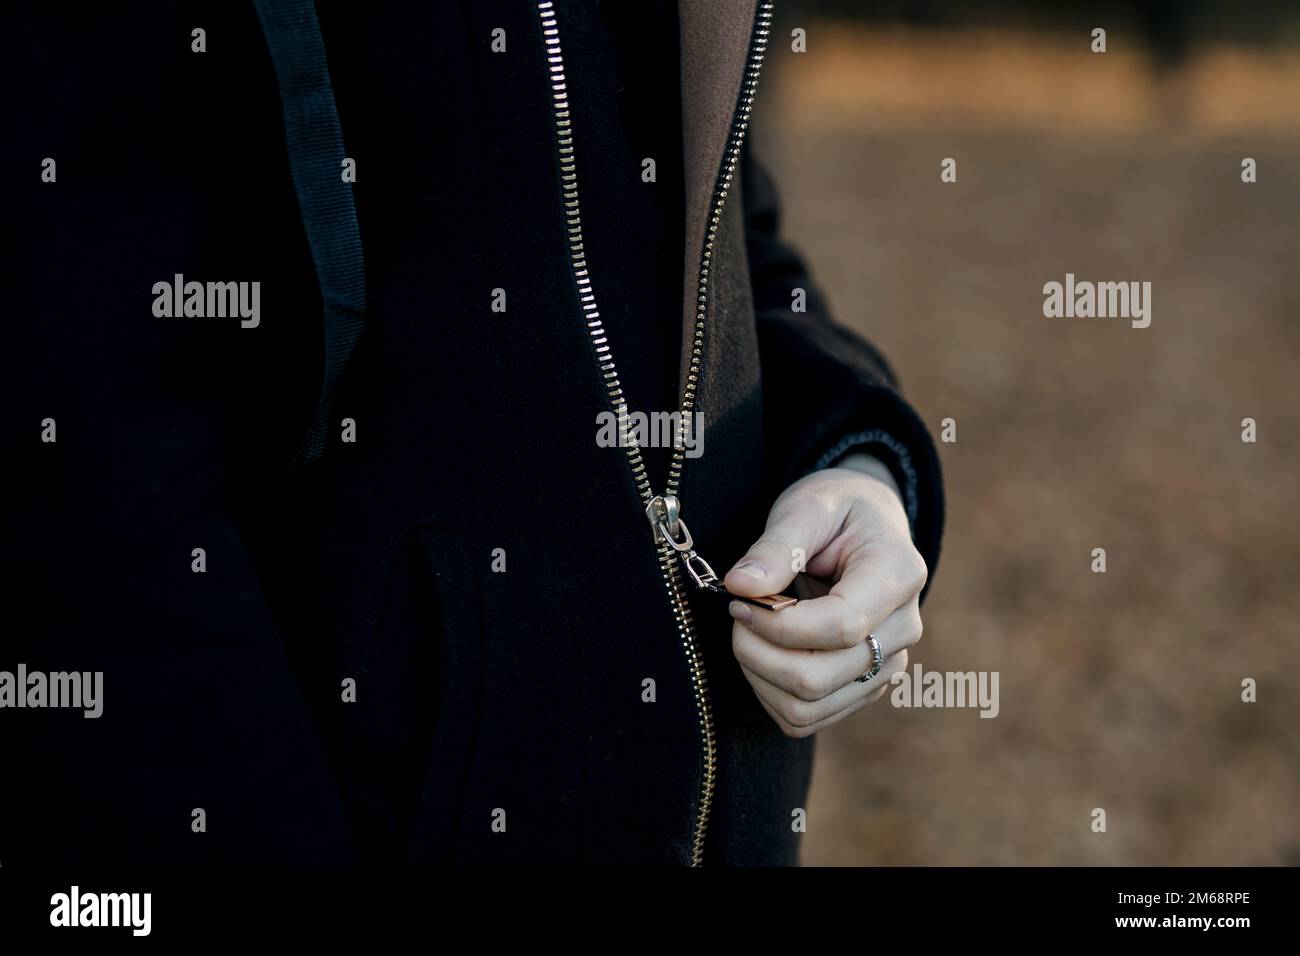 close-up of hands zipping up a jacket. a woman buttons up a black coat Stock Photo